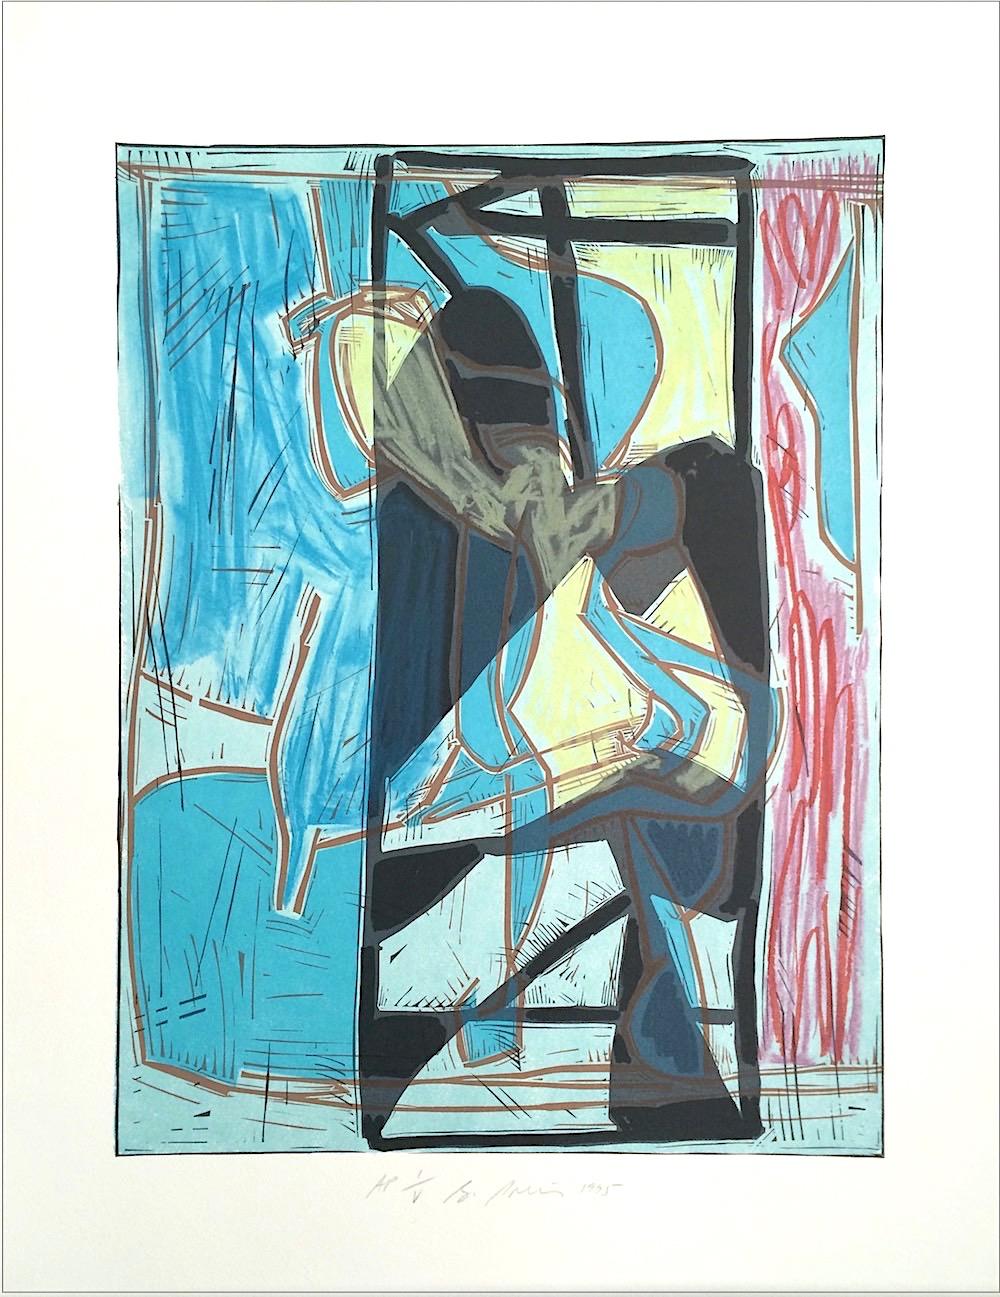 Bruce Porter Abstract Print - Composition 4:Blue Modernist Abstract, Signed Lithograph Linocut, Retro Shapes